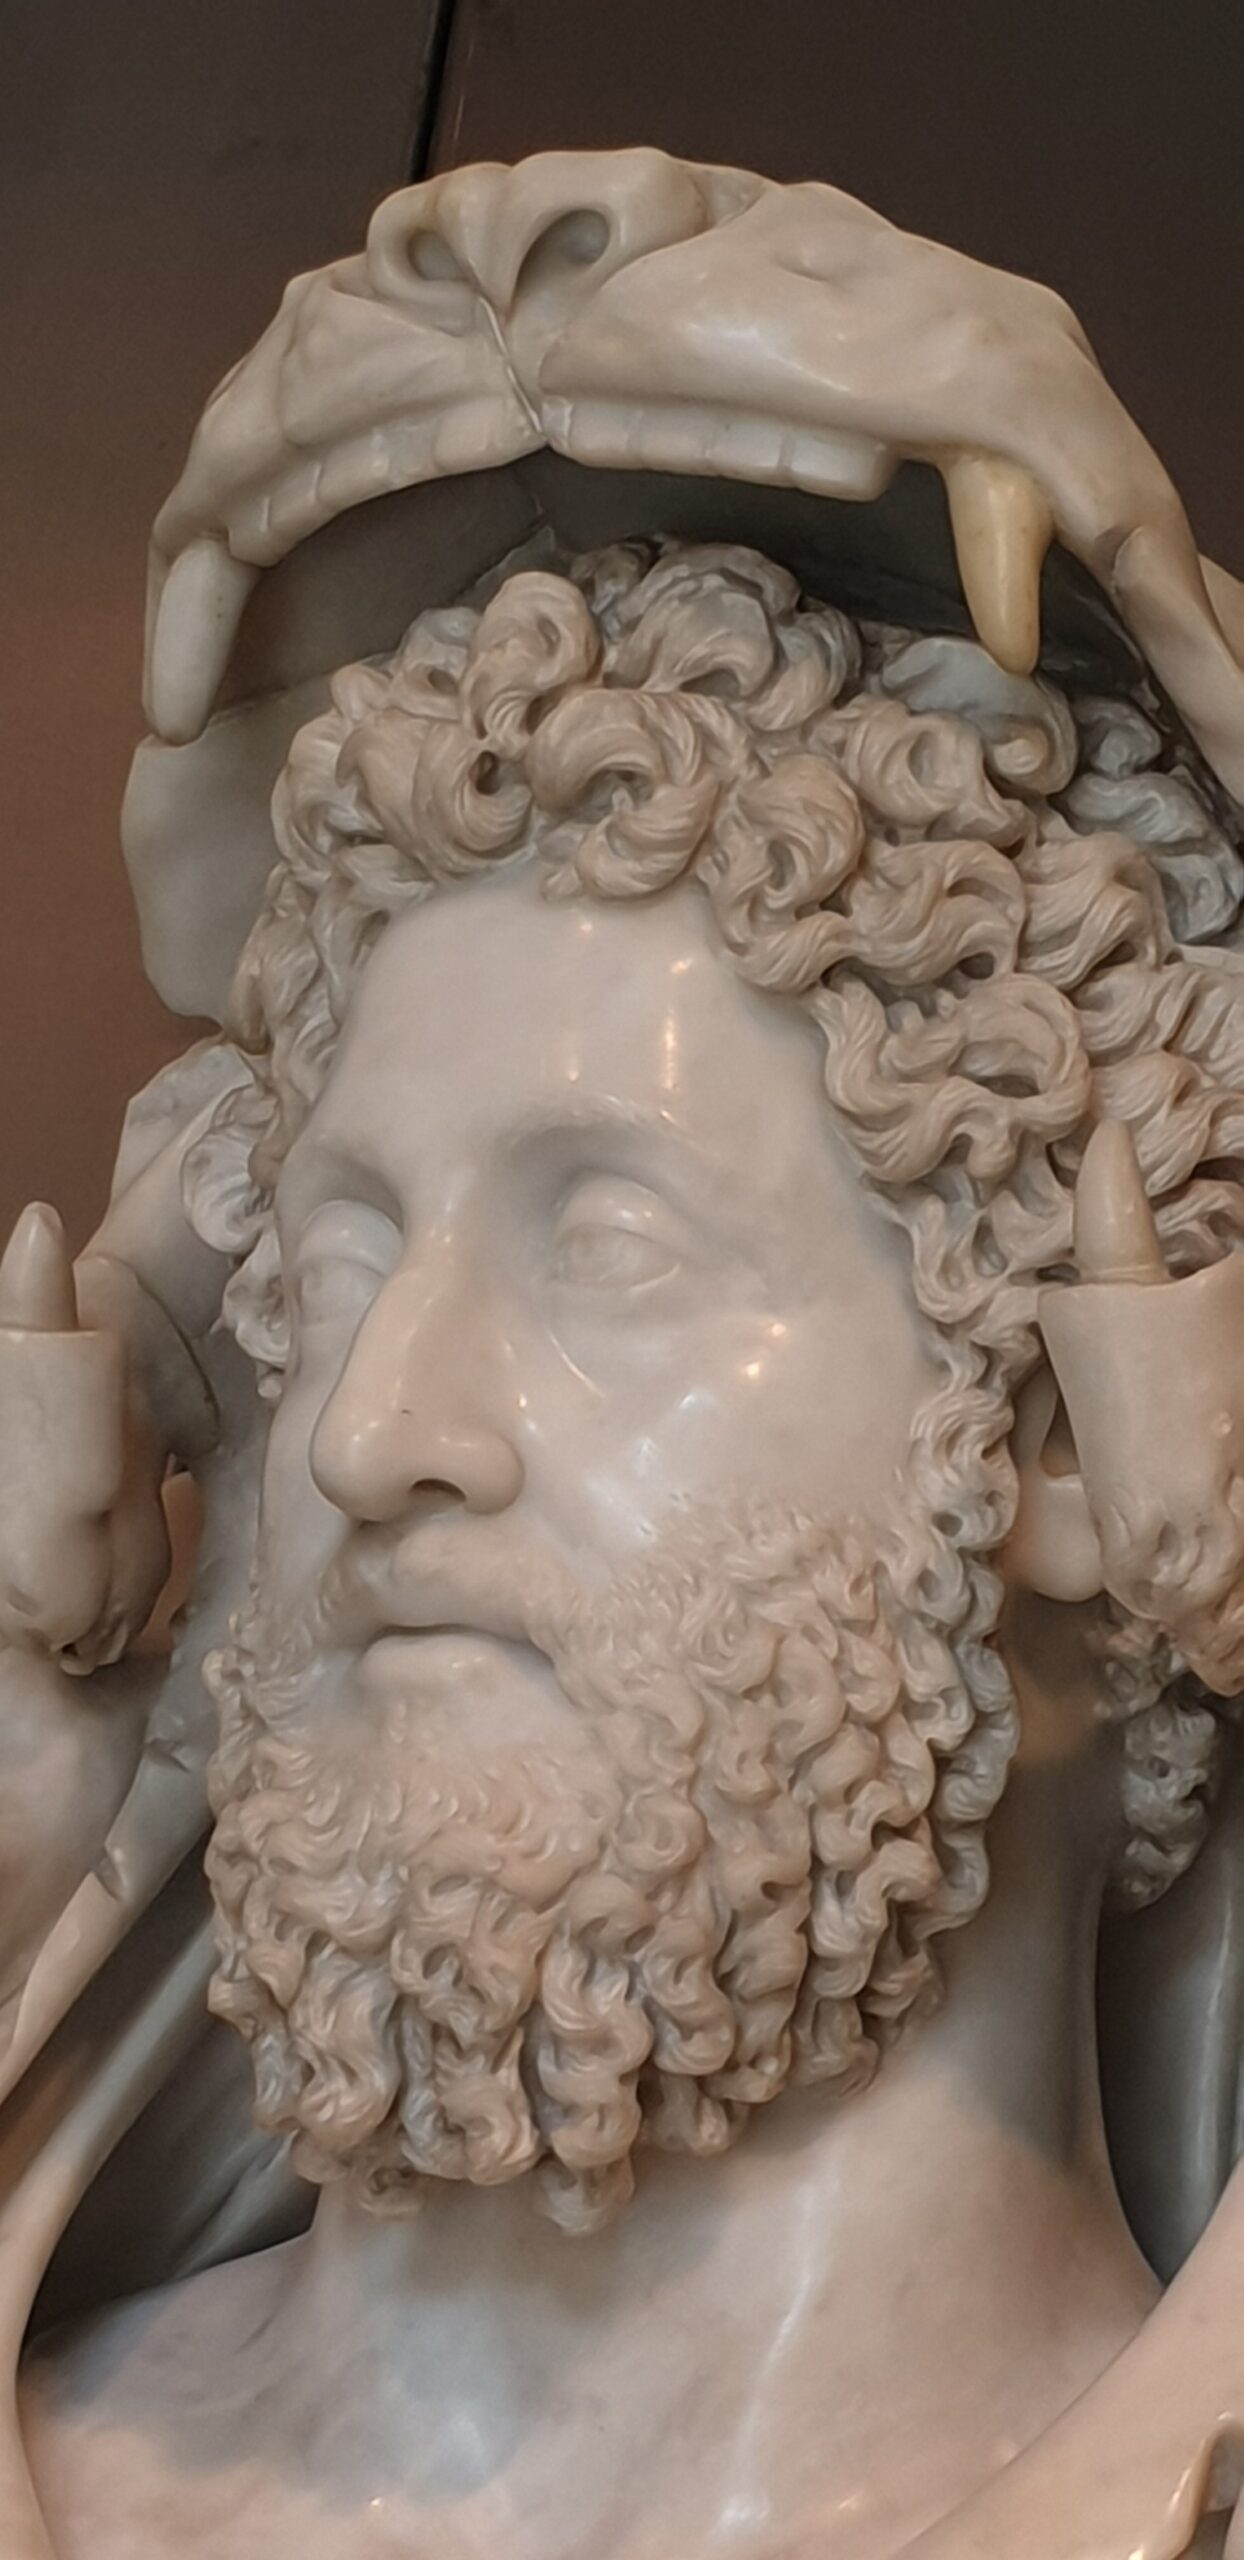 Bust of Commodus as Hercules